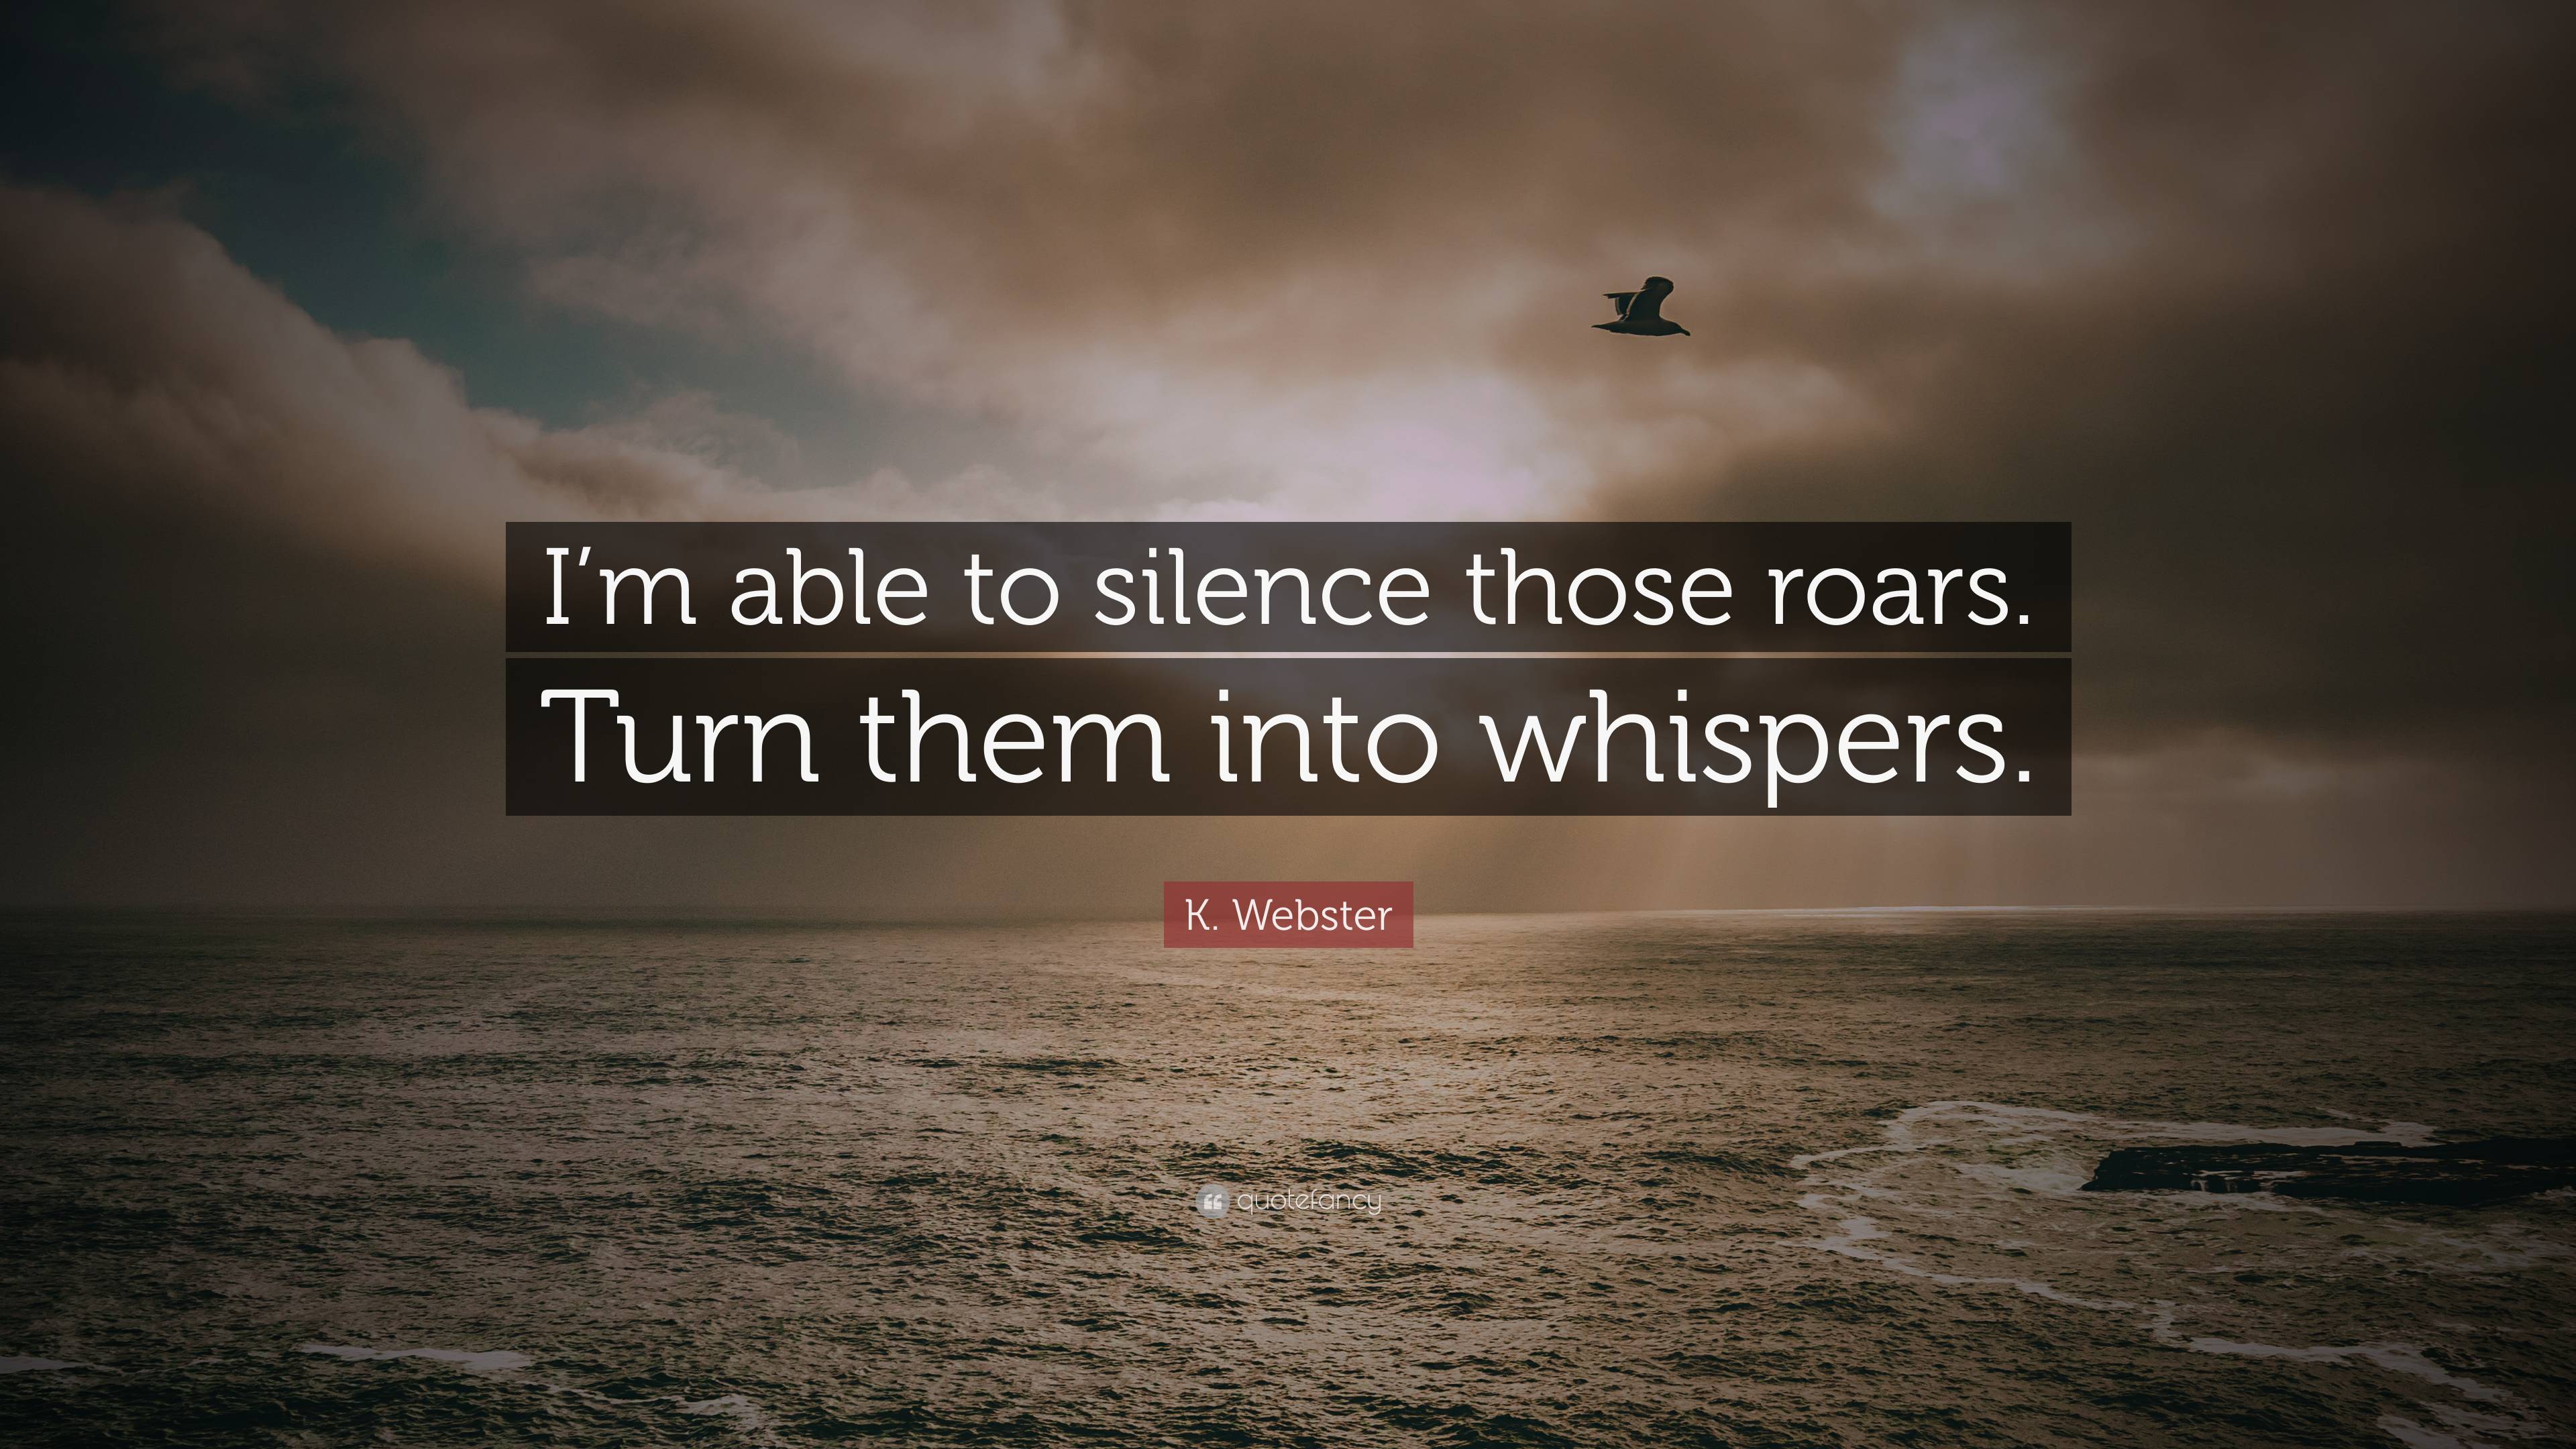 From Whispers to Roars